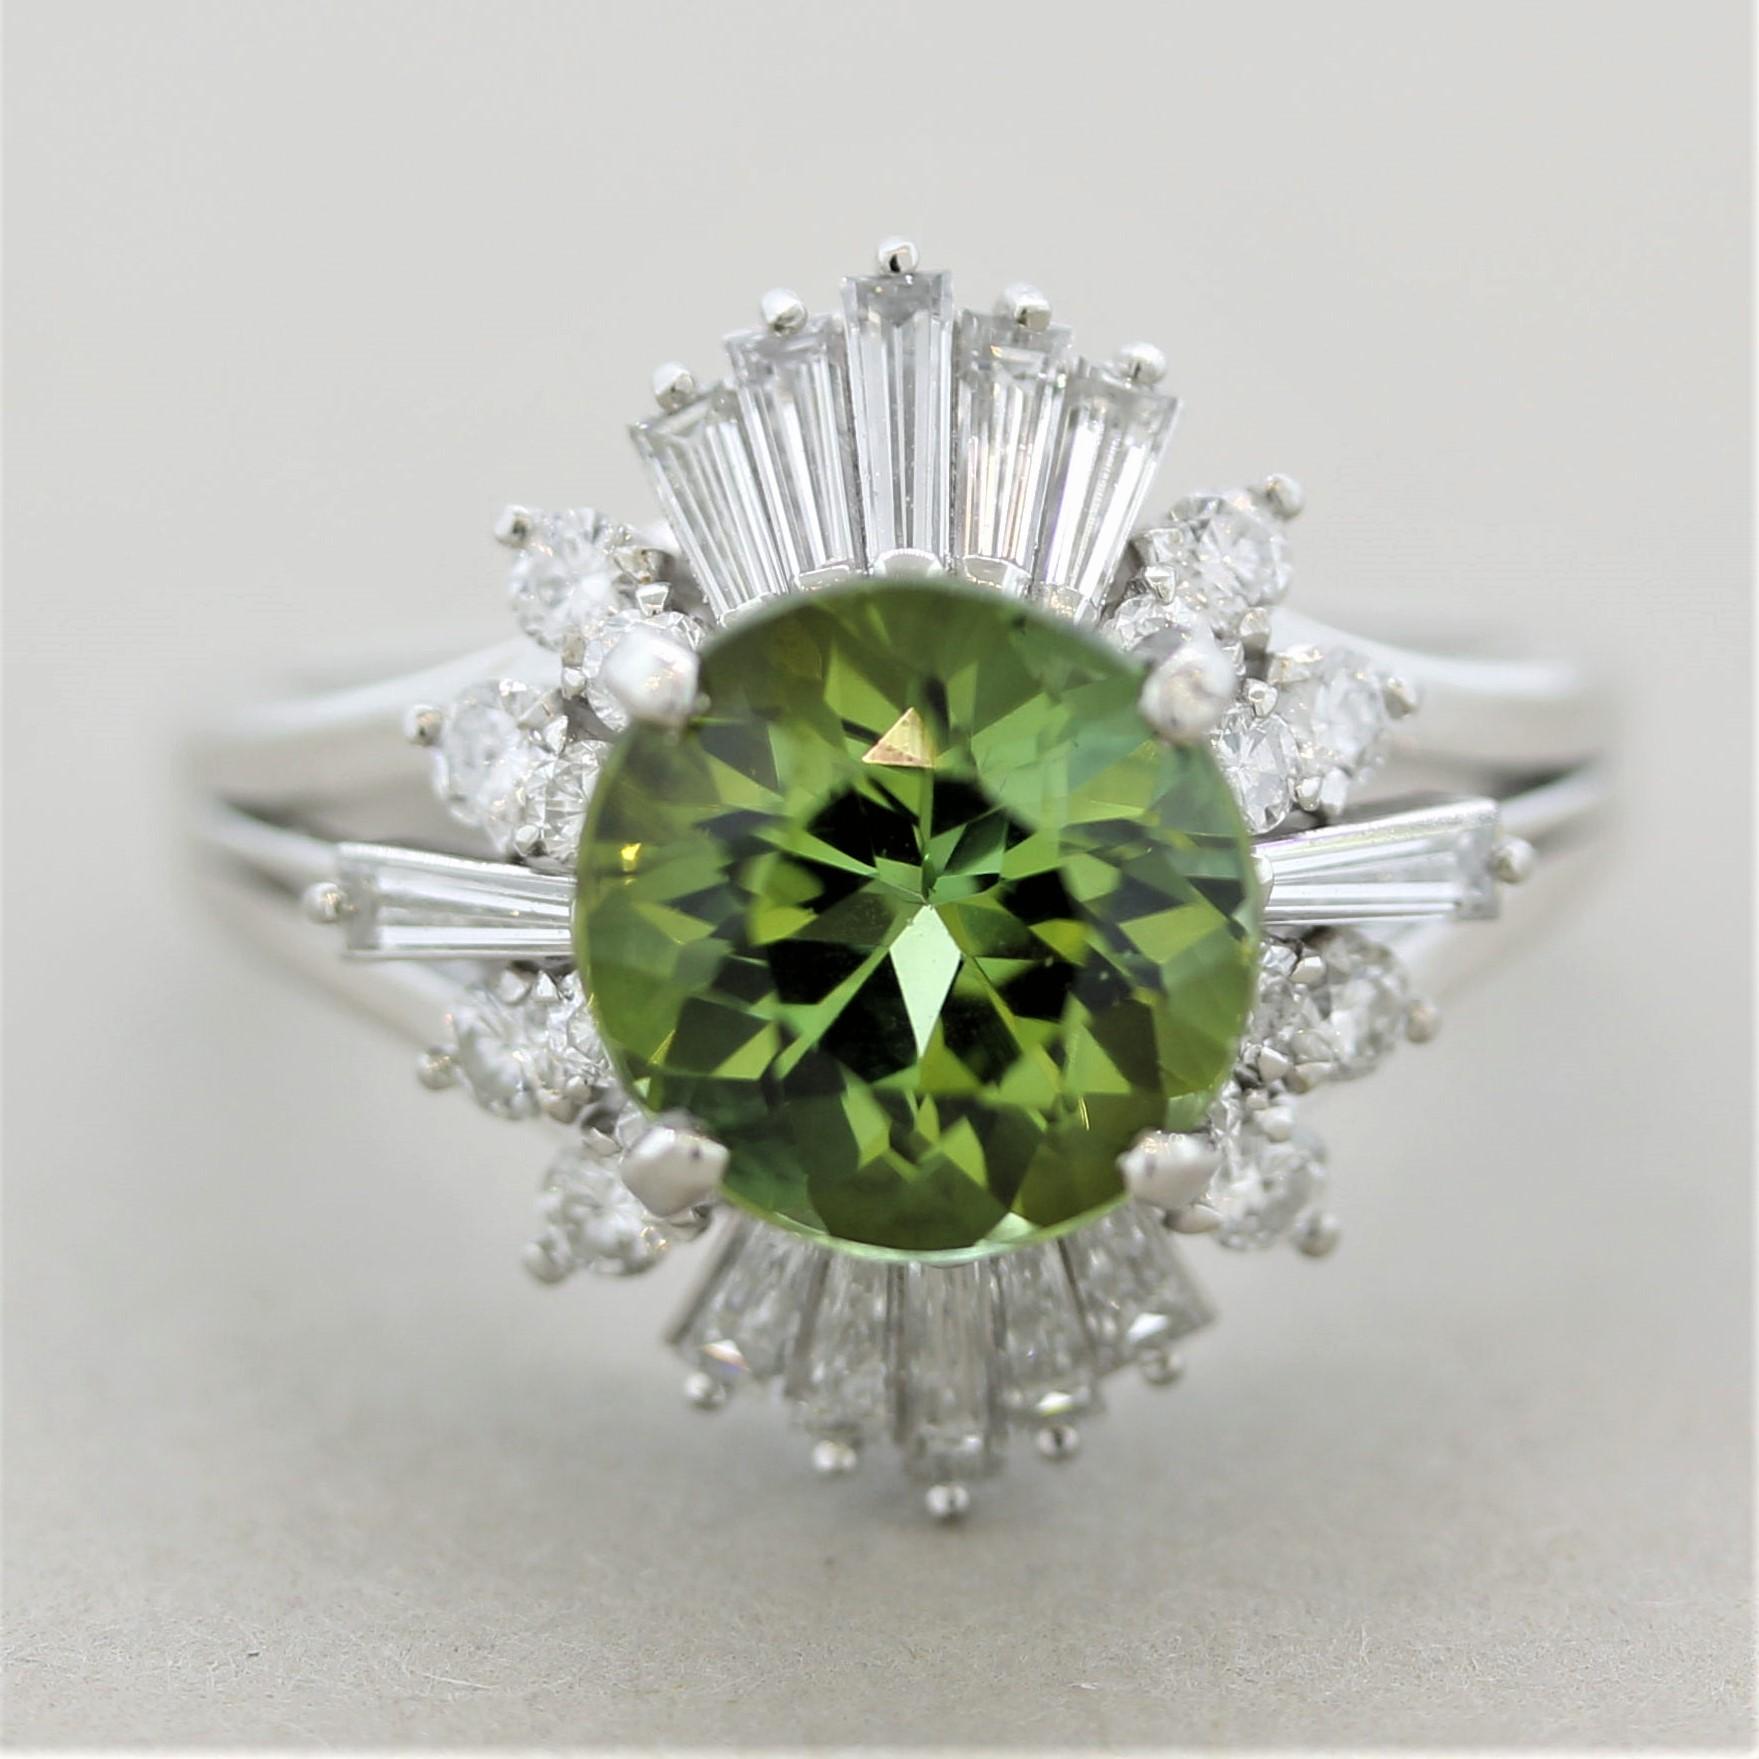 A sweet and stylish tourmaline and diamond ring! The tourmaline weighs 2.57 carats and has a bright lively lime green color with excellent brilliance. It is accented by 0.95 carats of round brilliant-cut and baguette-cut diamonds set around the